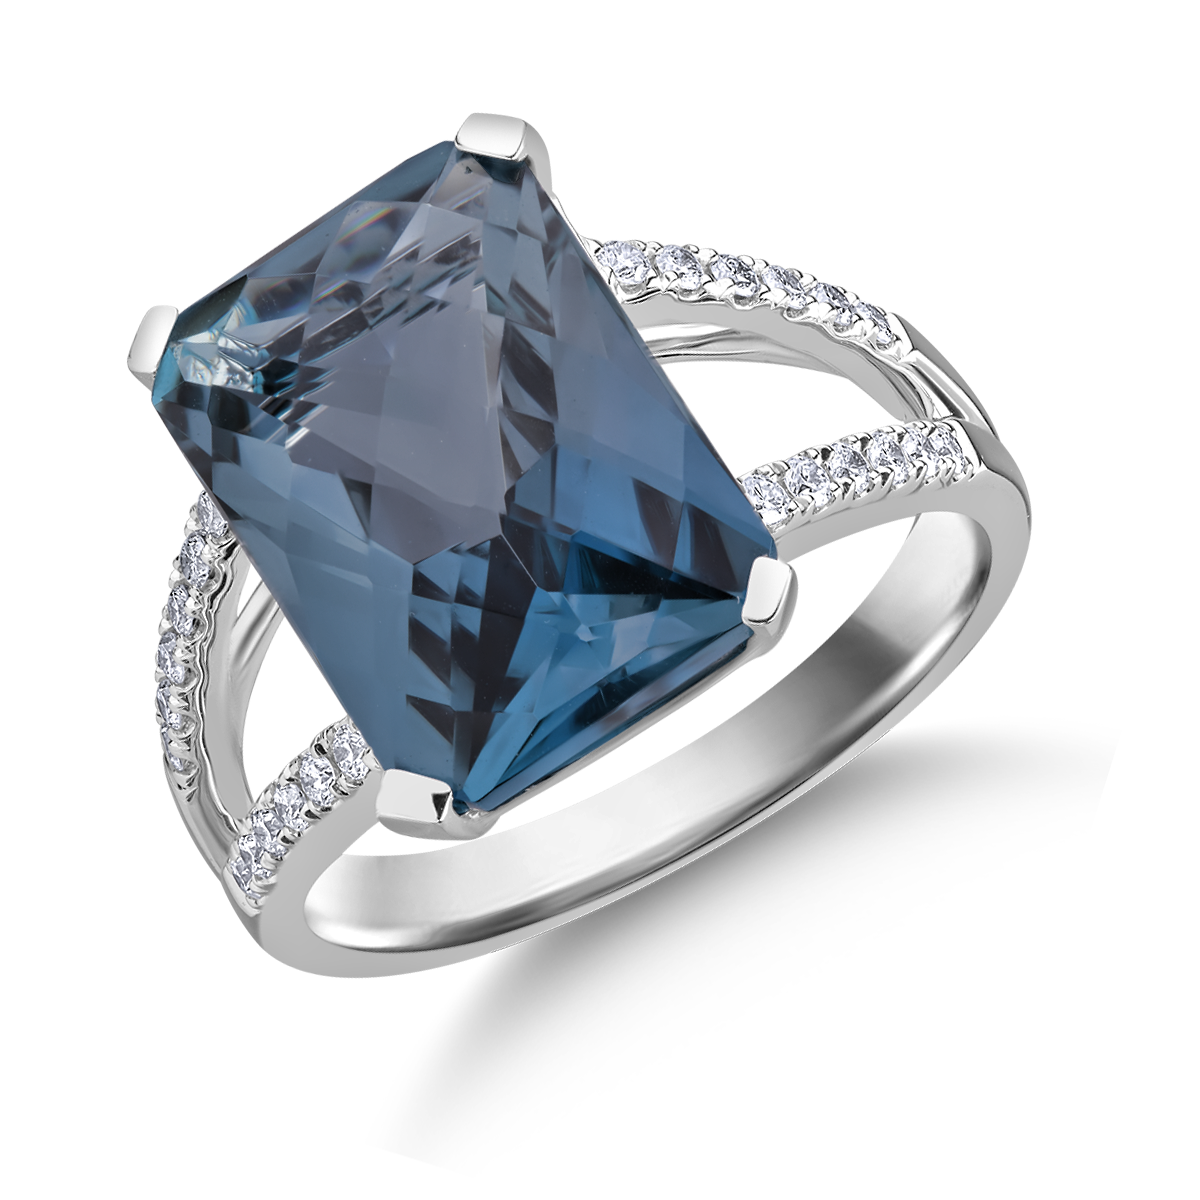 White gold ring with 9.85ct london blue topaz and 0.215ct diamonds